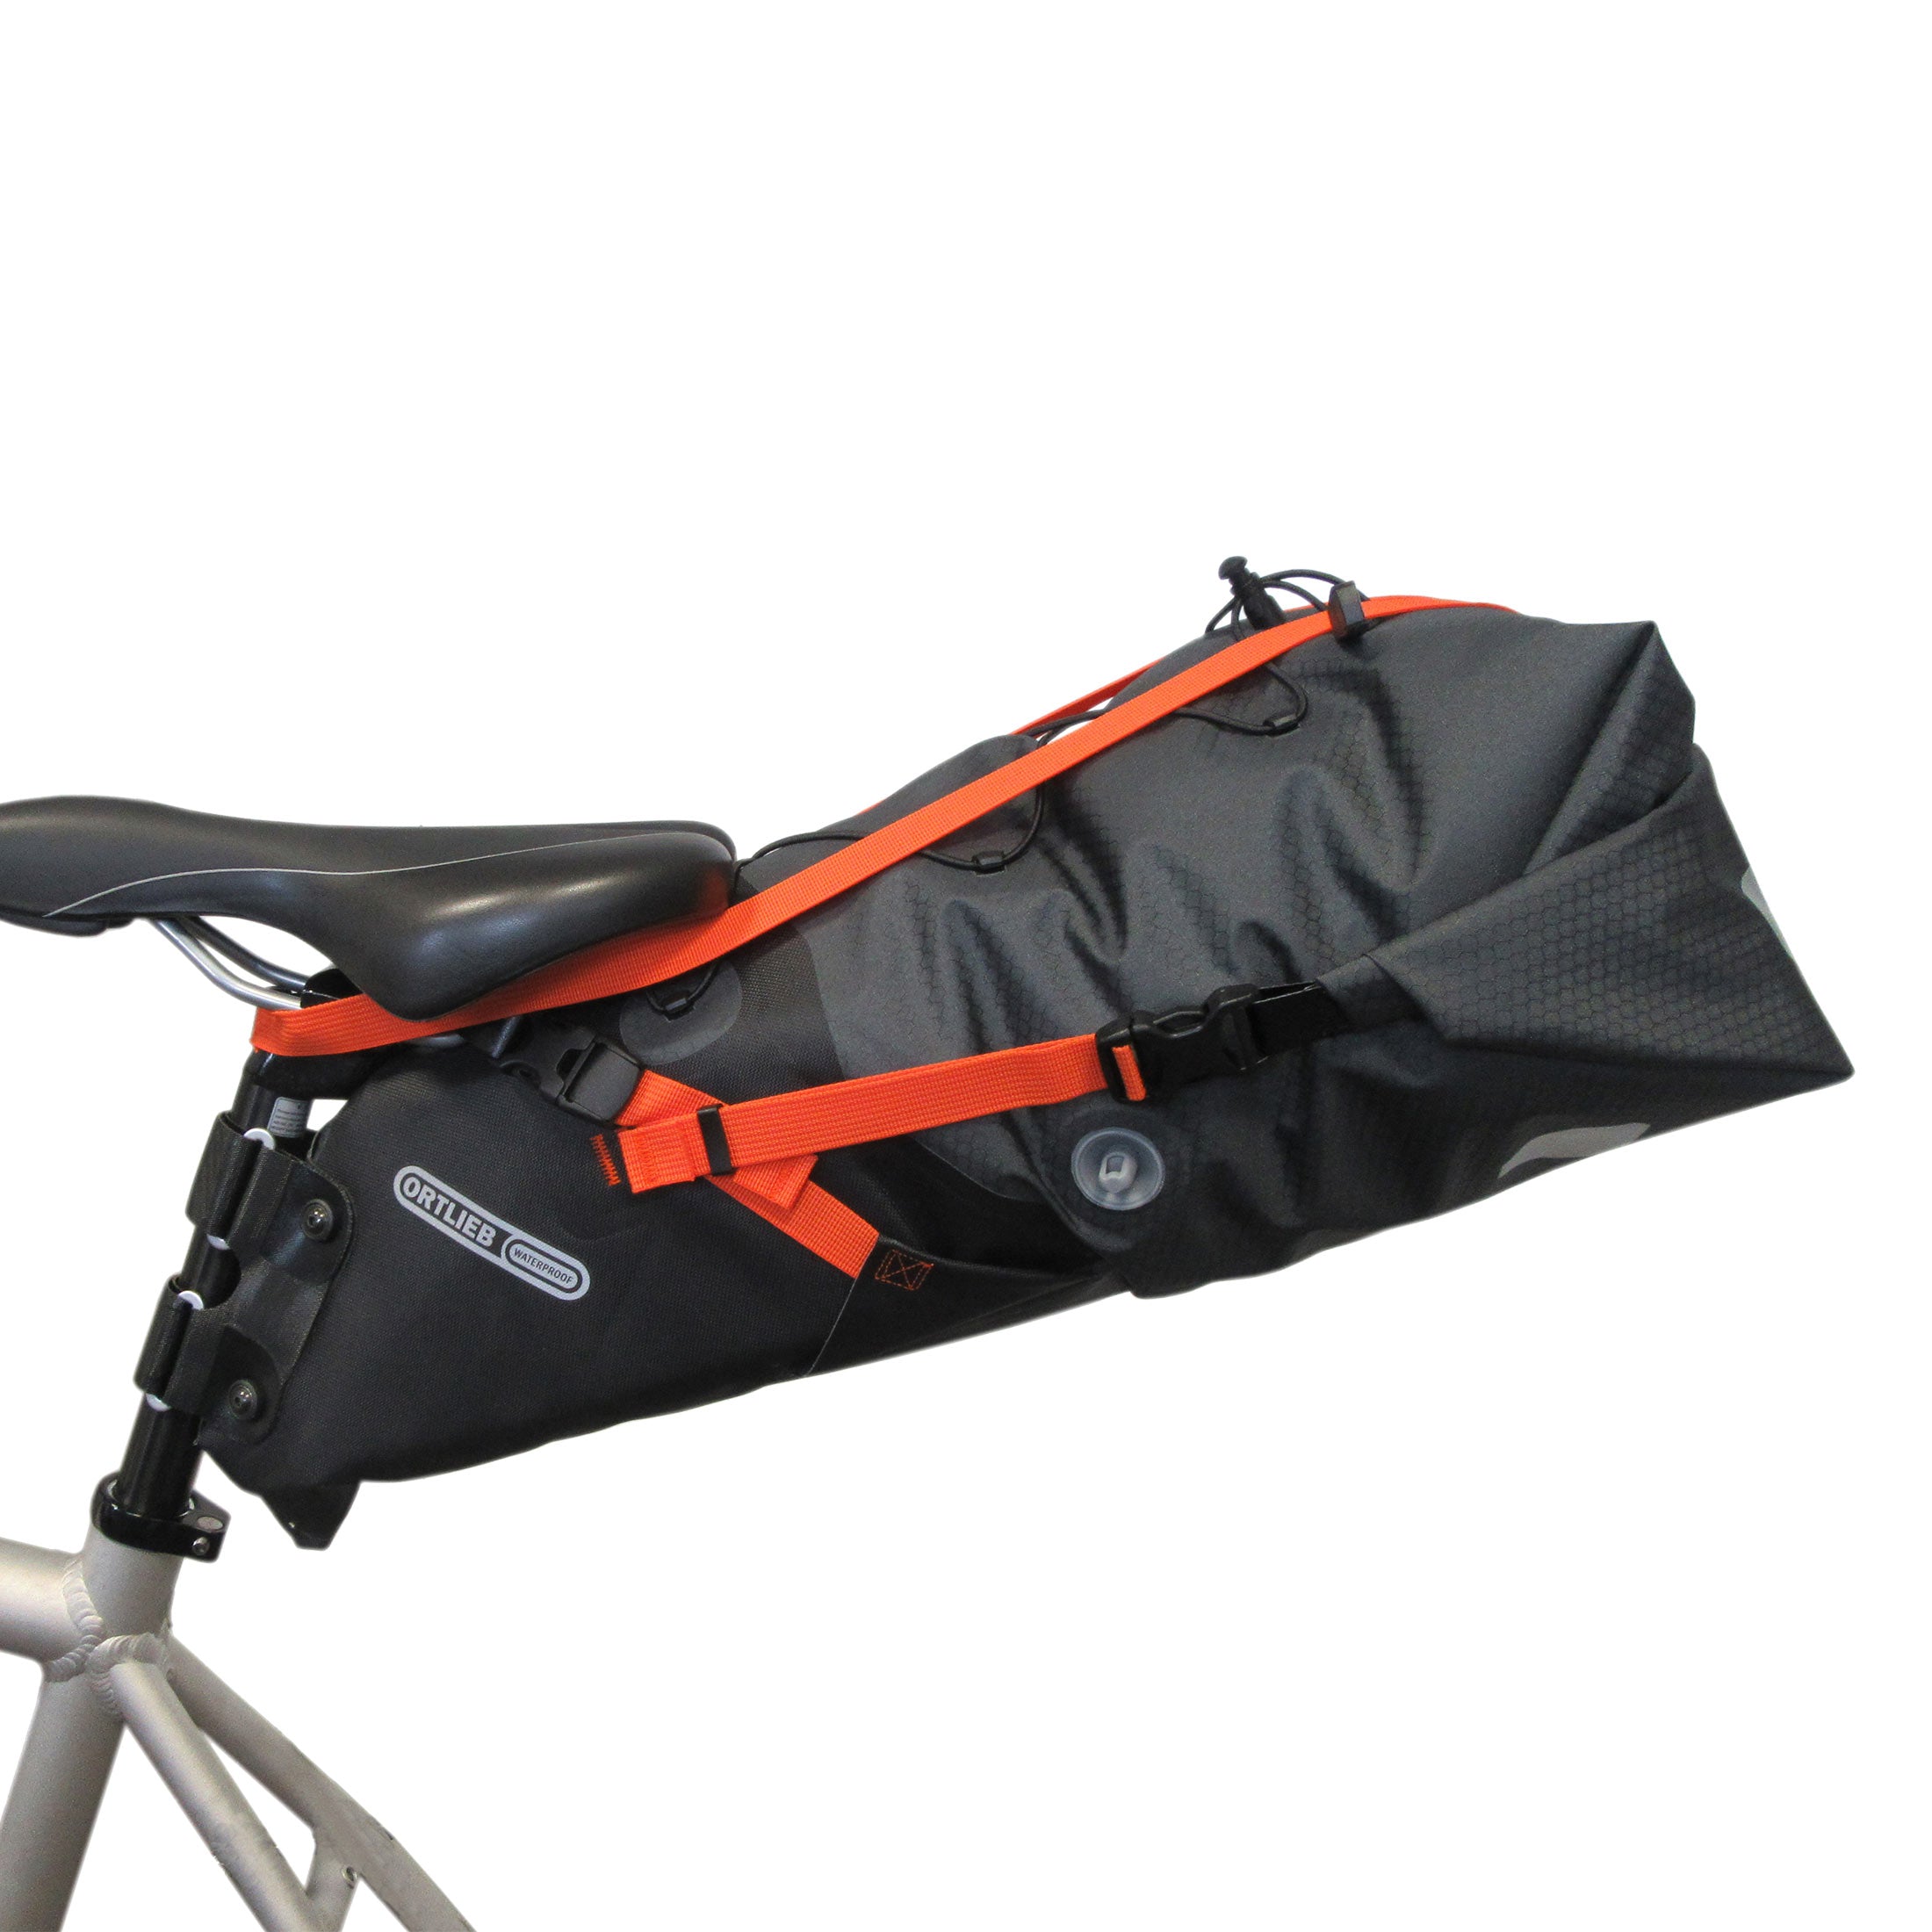 ORTLIEB BikePacking Seat-Pack Support Strap now from £8.00